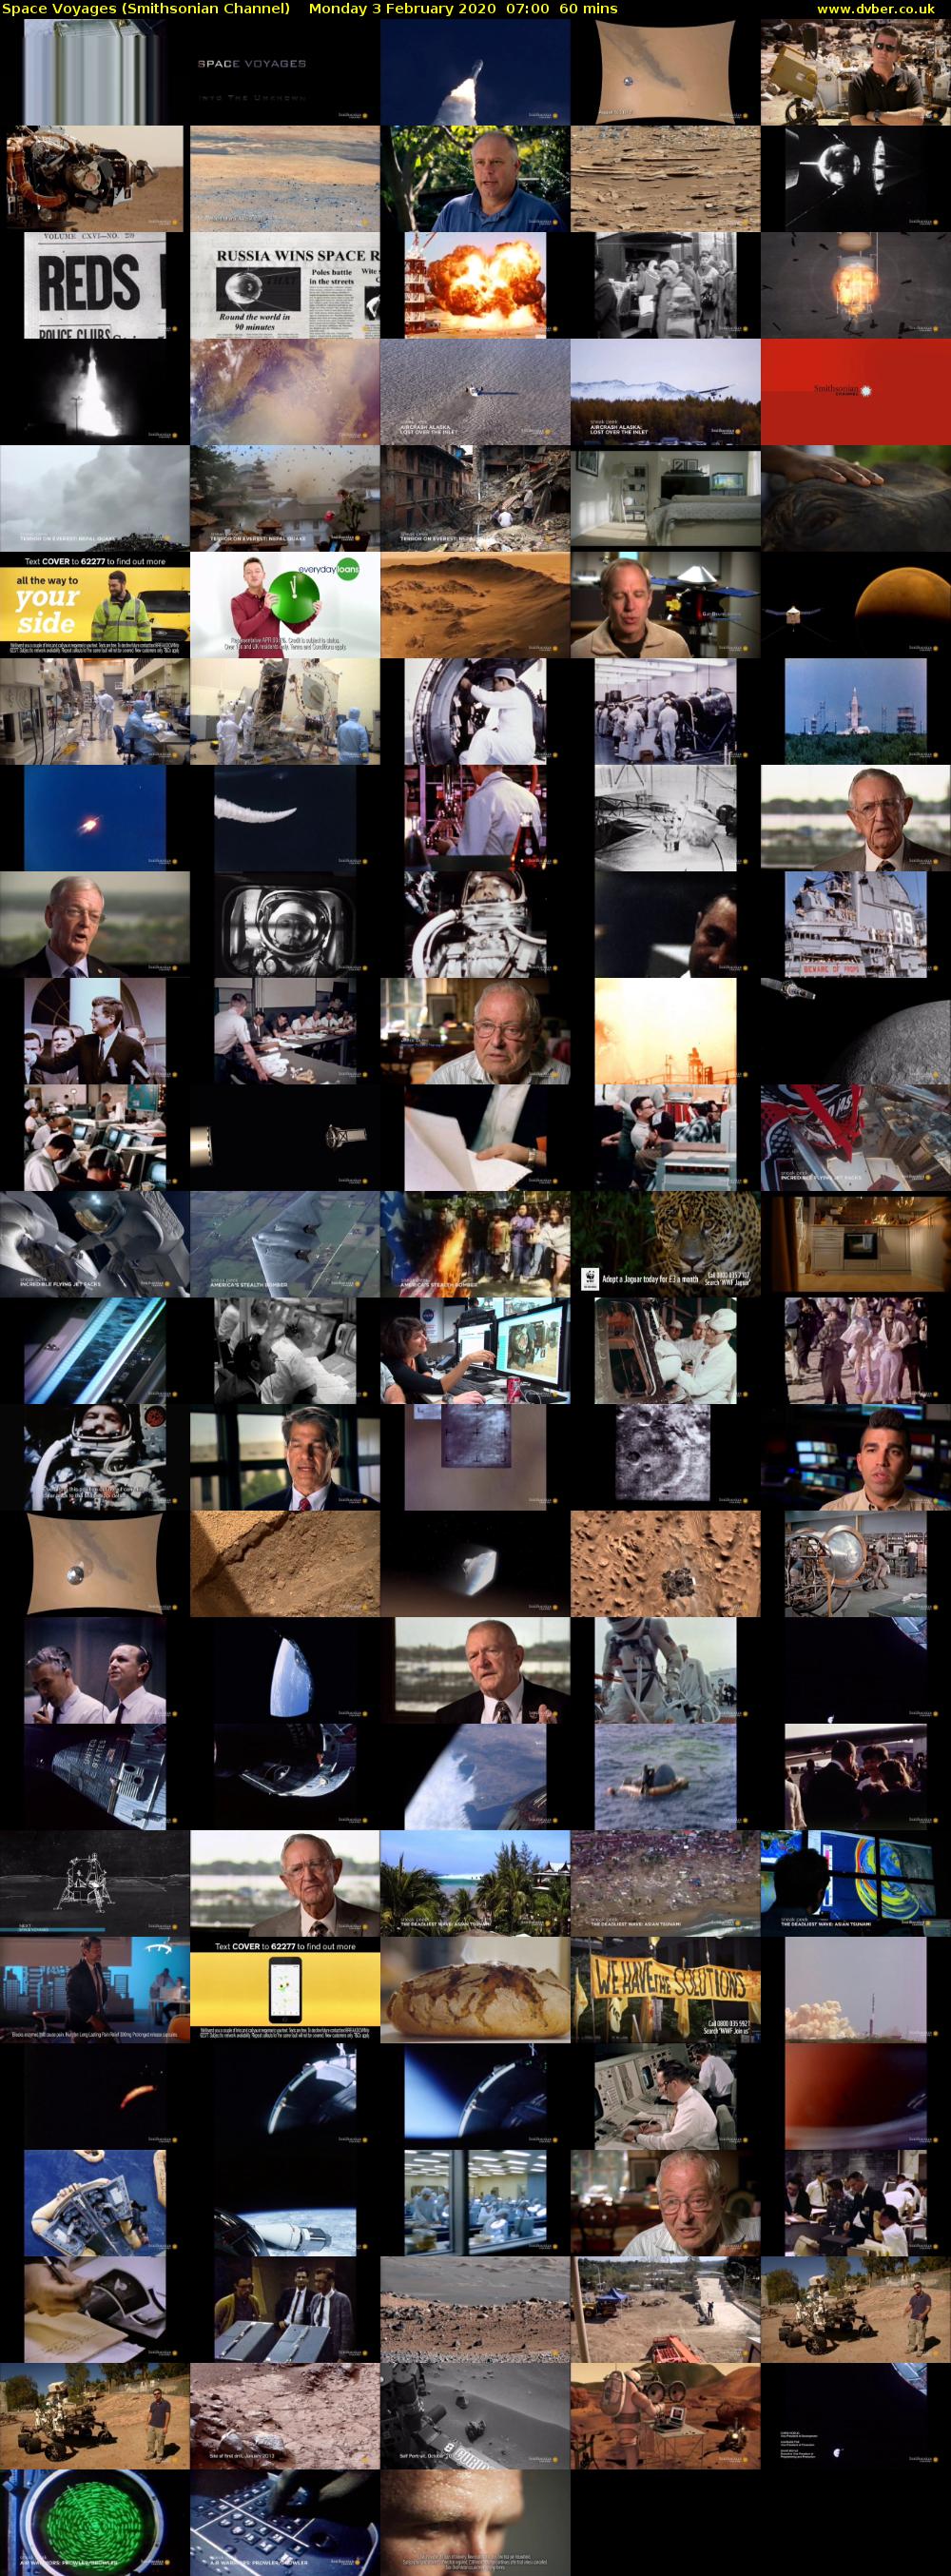 Space Voyages (Smithsonian Channel) Monday 3 February 2020 07:00 - 08:00